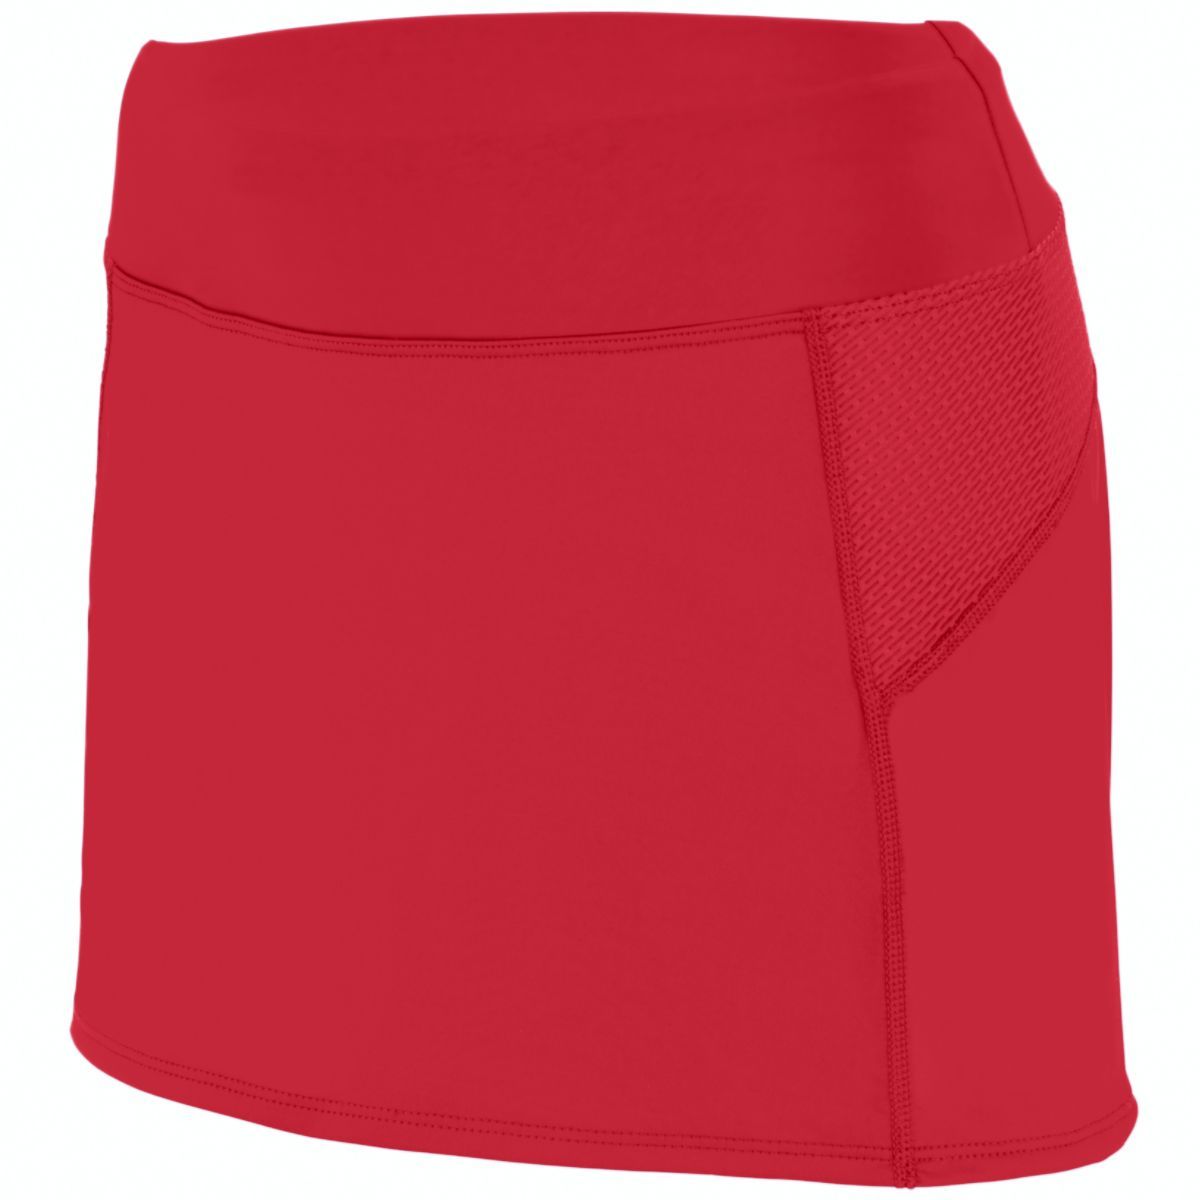 Augusta Sportswear Ladies Femfit Skort in Red/Graphite  -Part of the Ladies, Augusta-Products product lines at KanaleyCreations.com